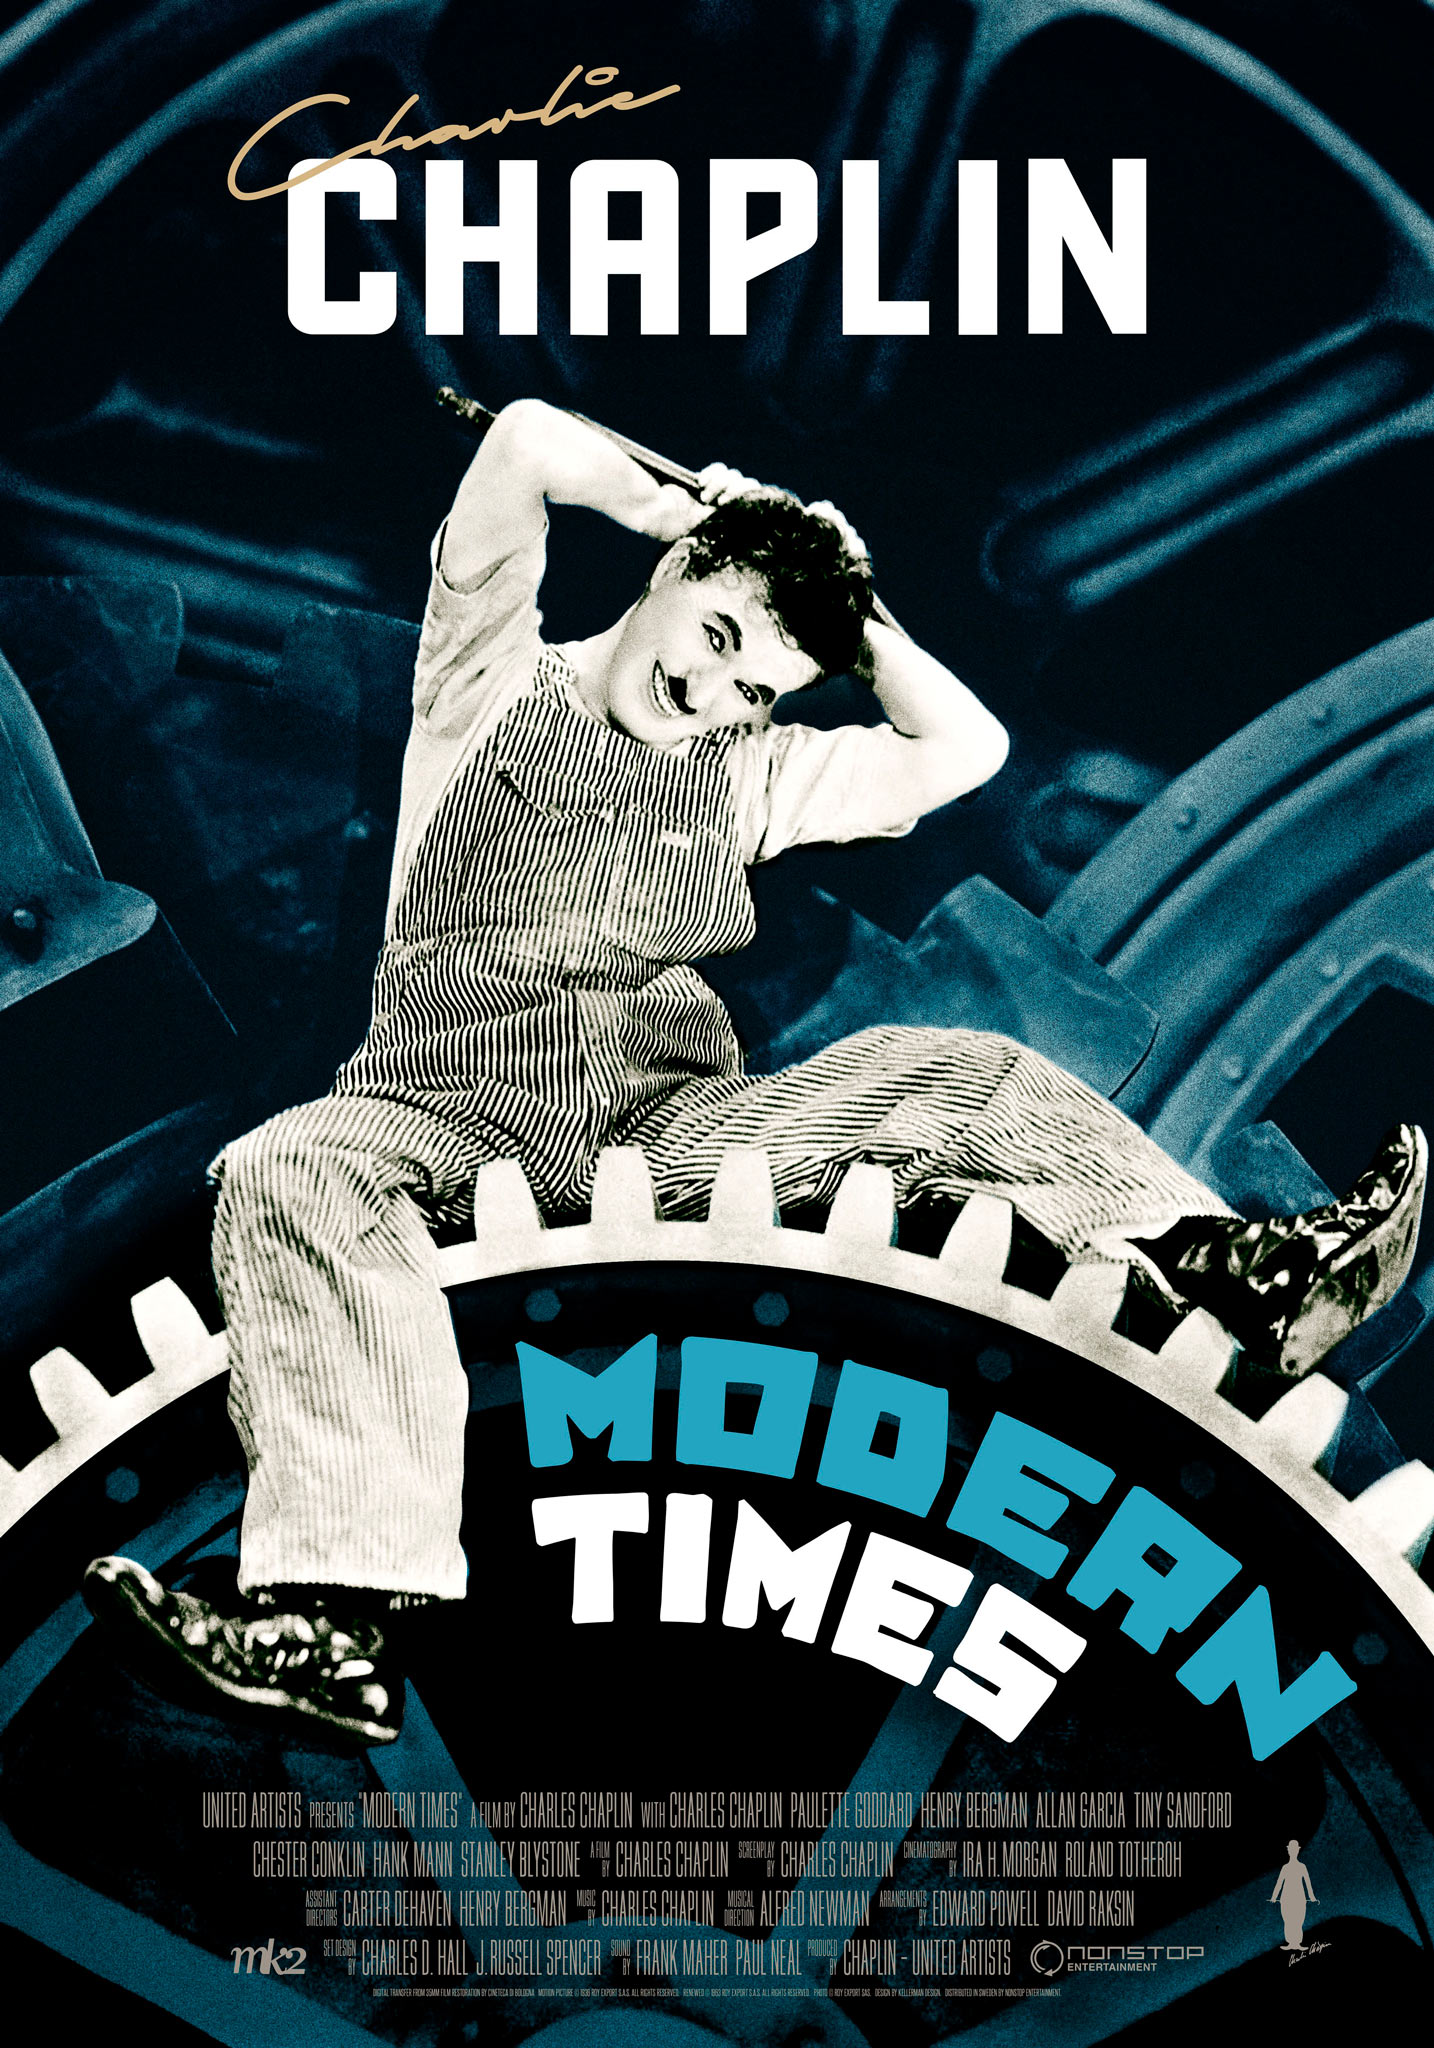 Modern Times (1936) theatrical onesheet